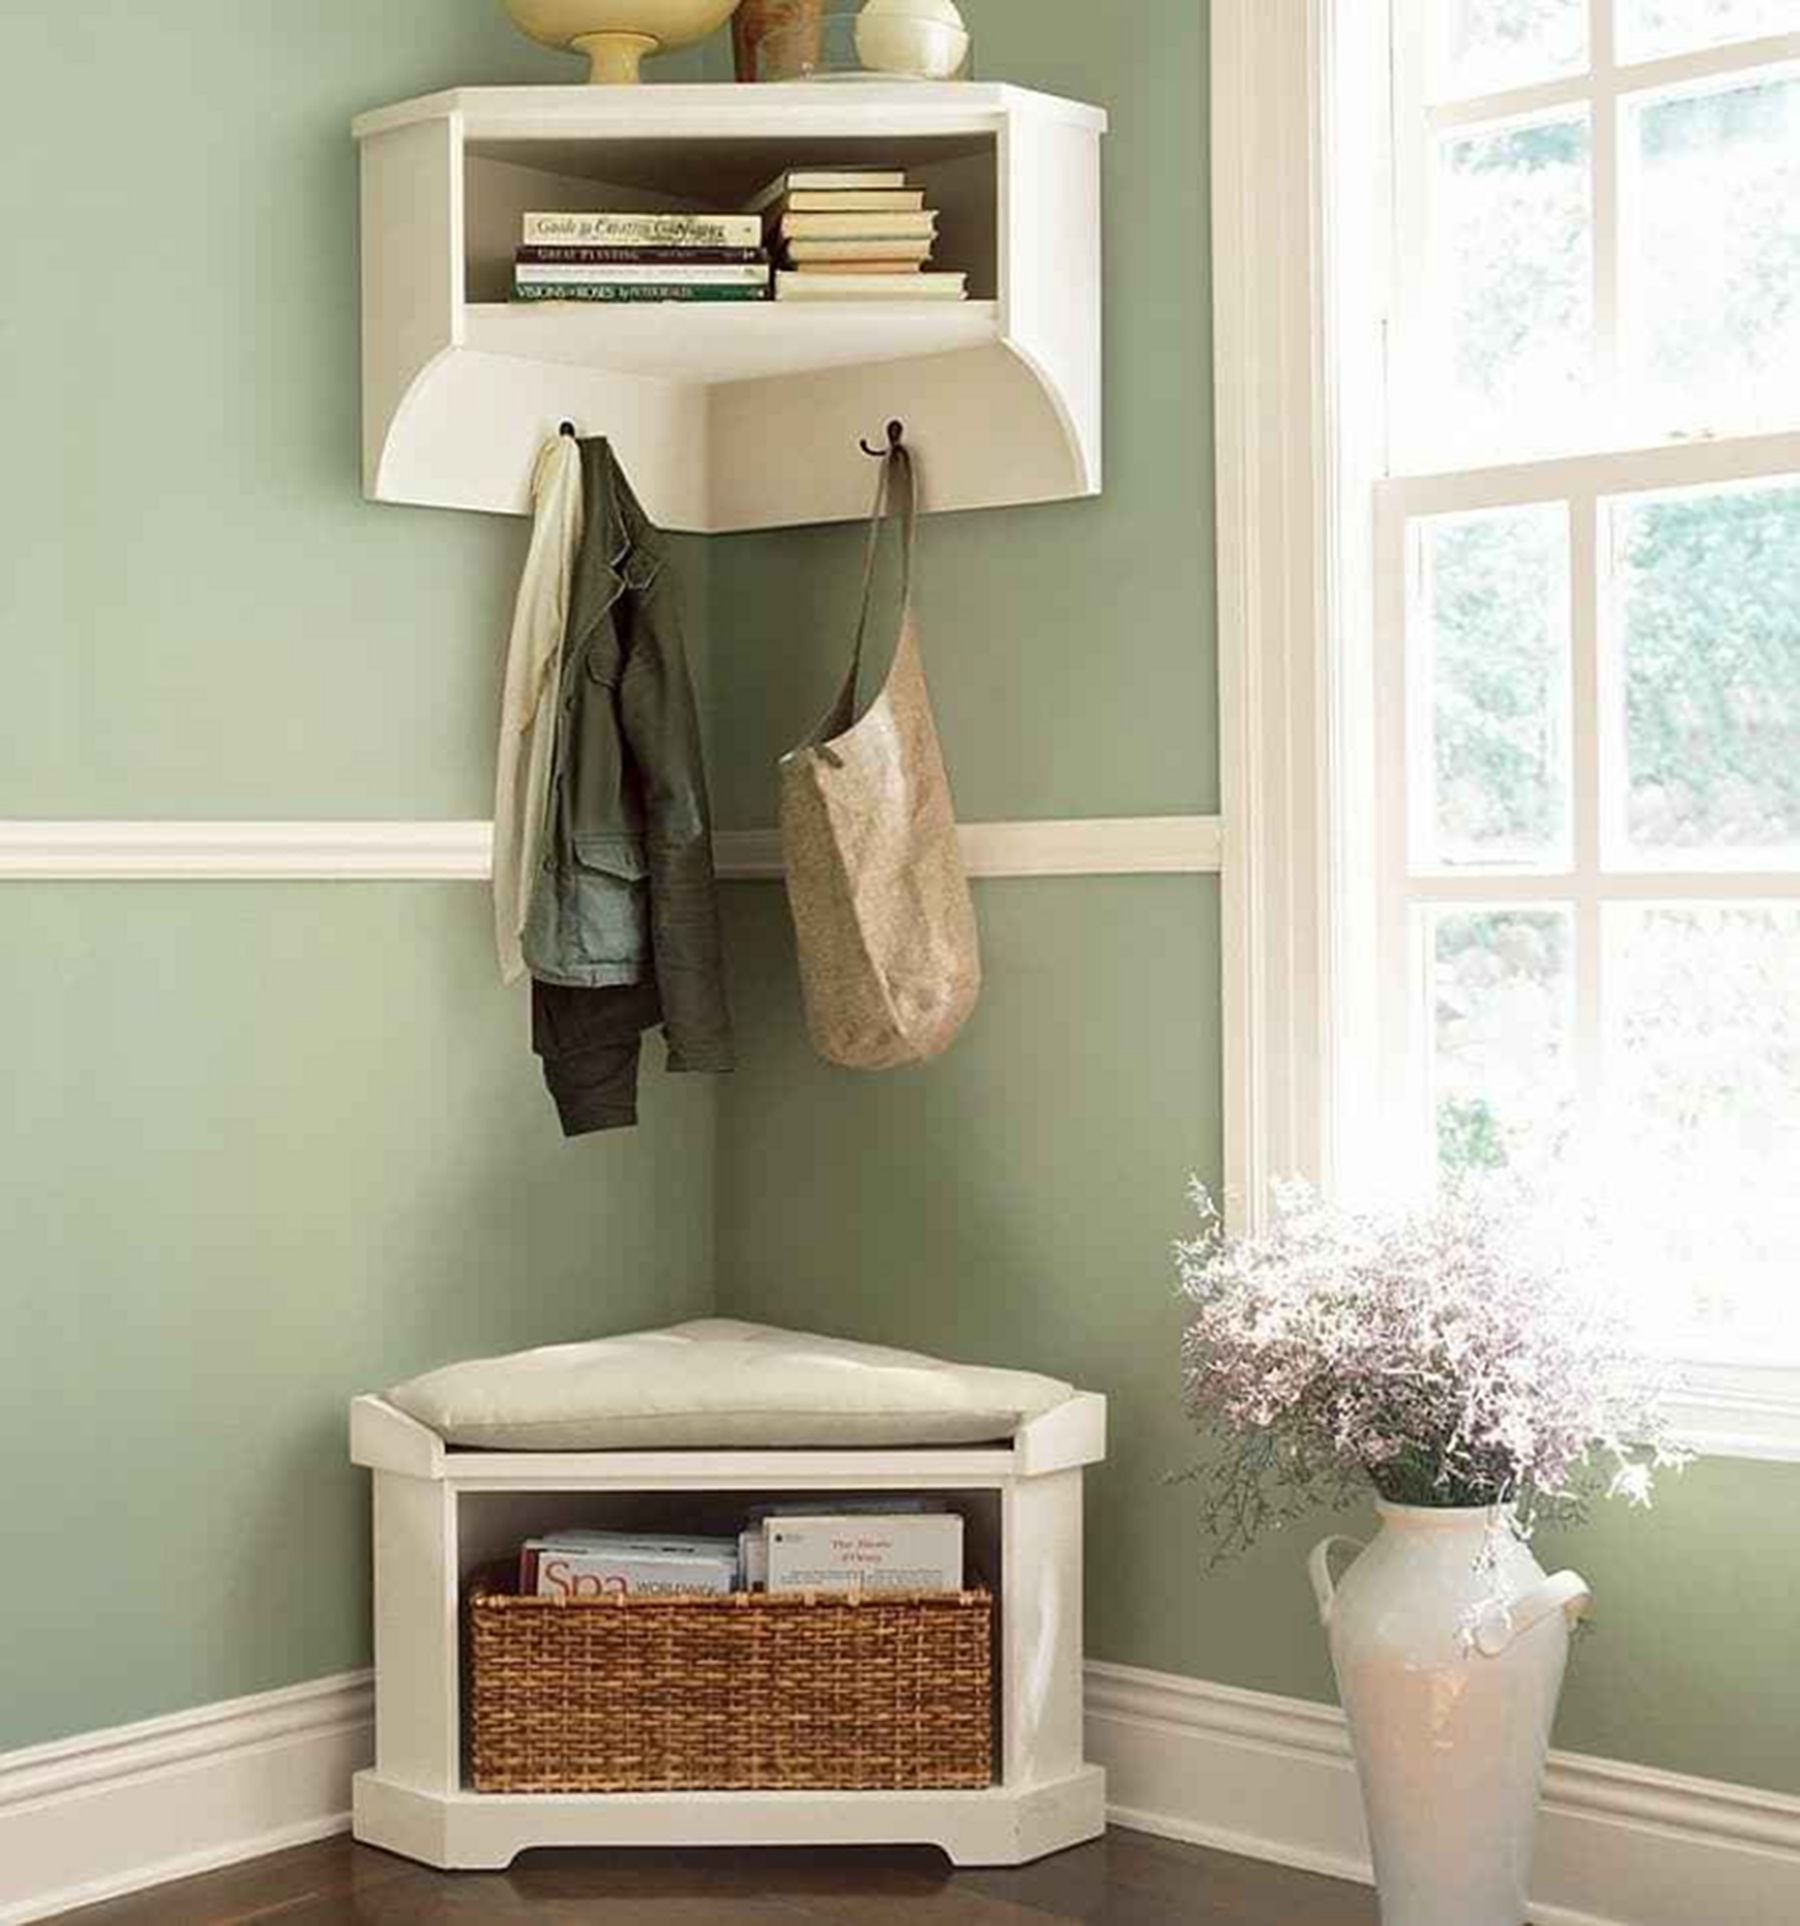 Steps to organizing and decluttering the entryway great article love